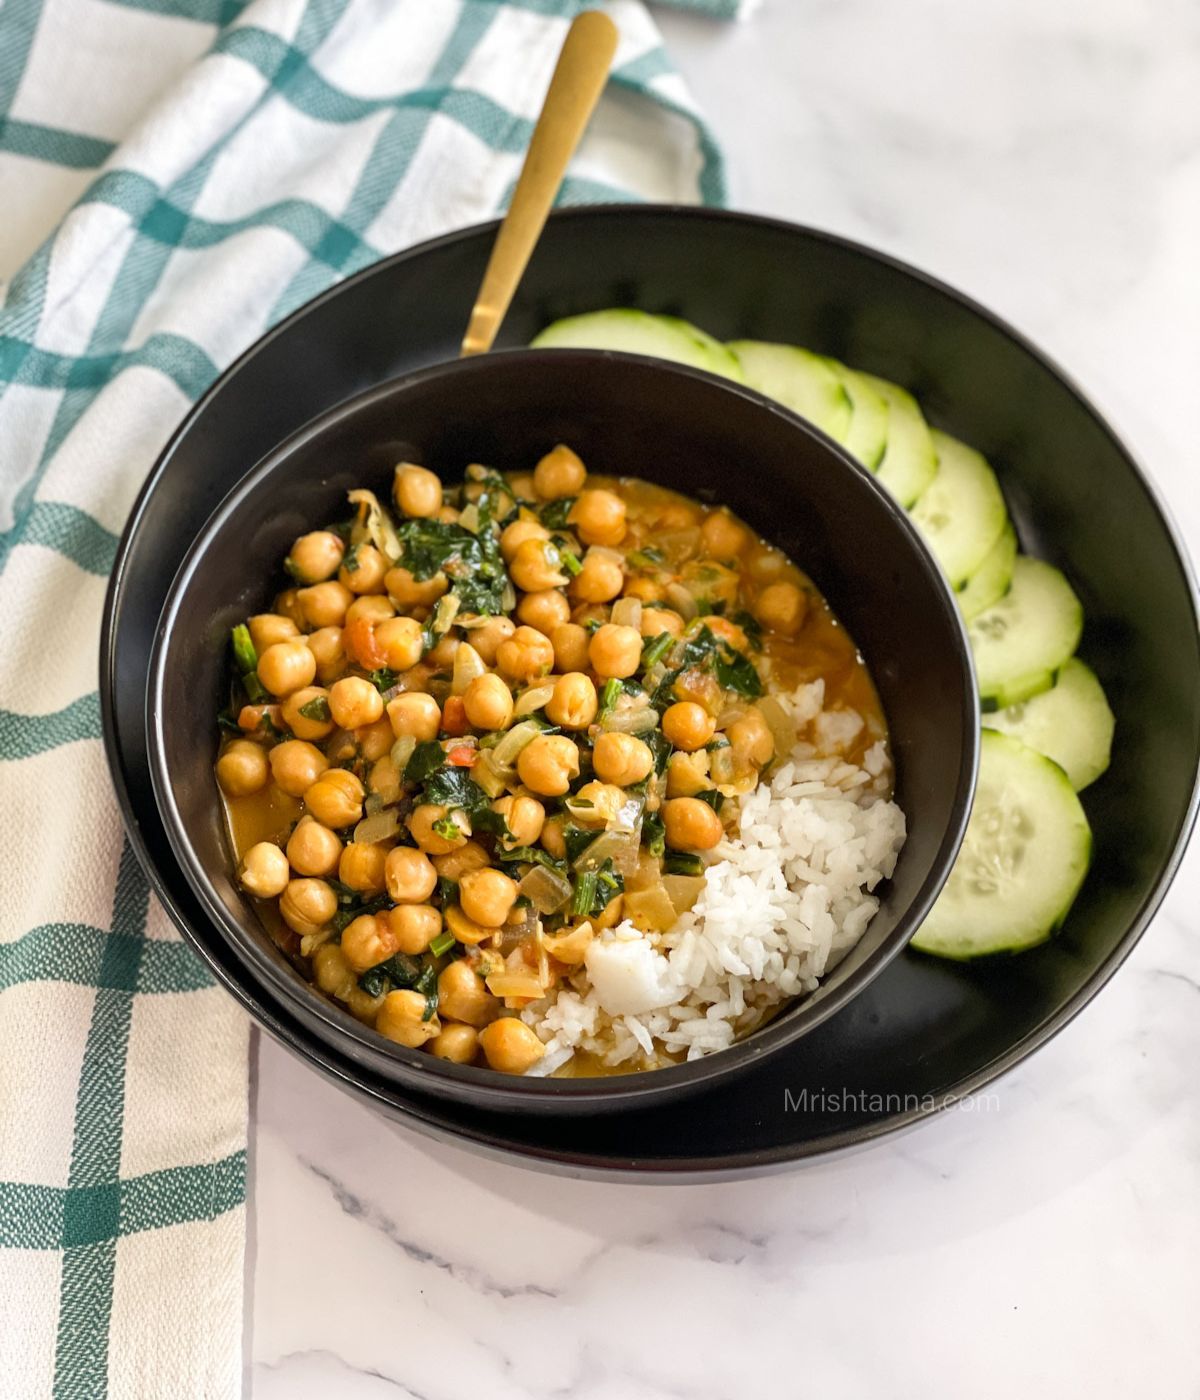 A bowl of instant pot chickpea curry is on the plate with sliced cucumbers.